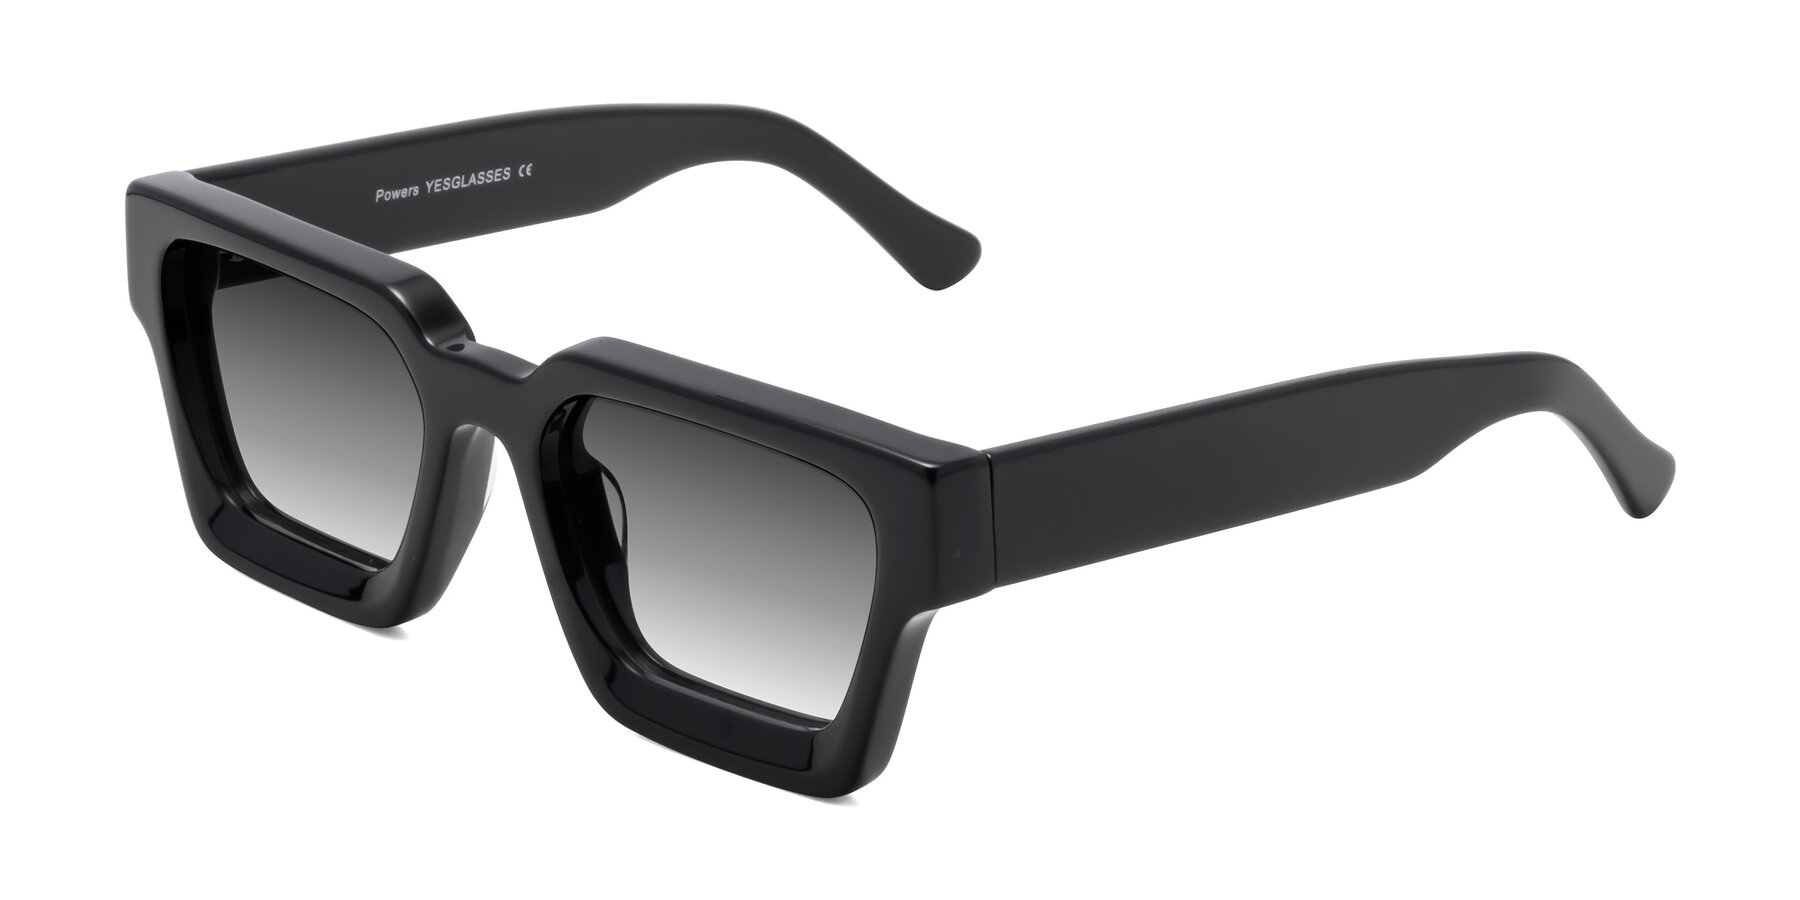 Angle of Powers in Black with Gray Gradient Lenses